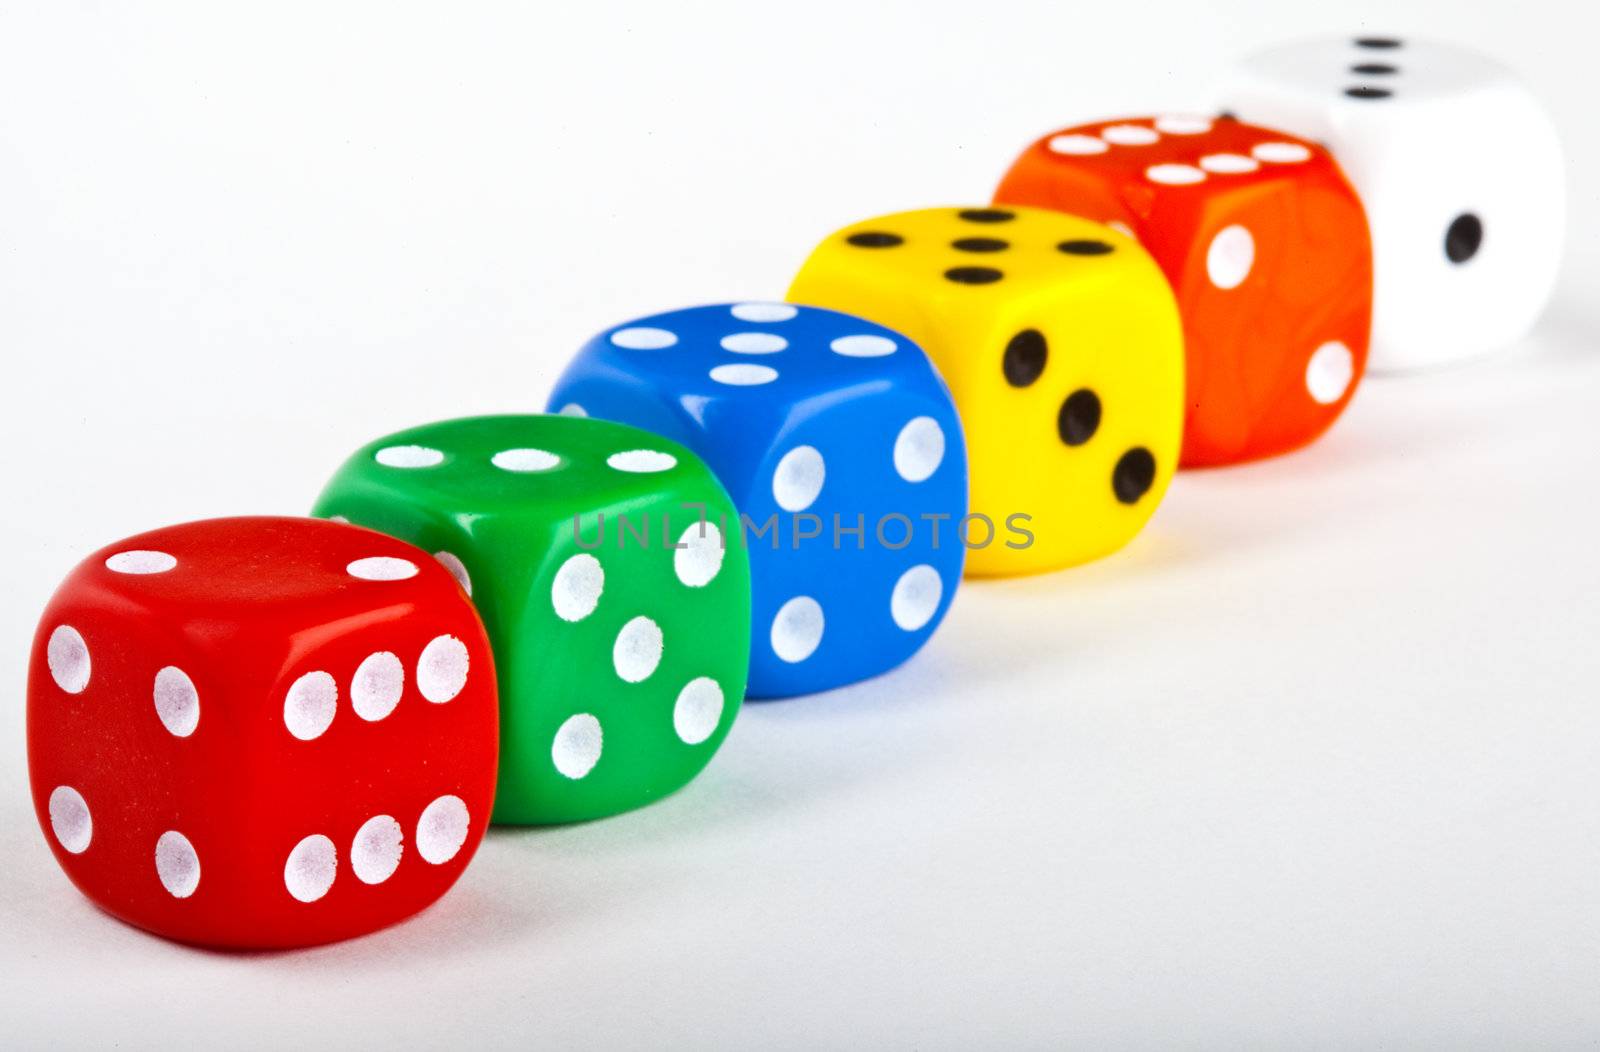 Six Dice over a white background.